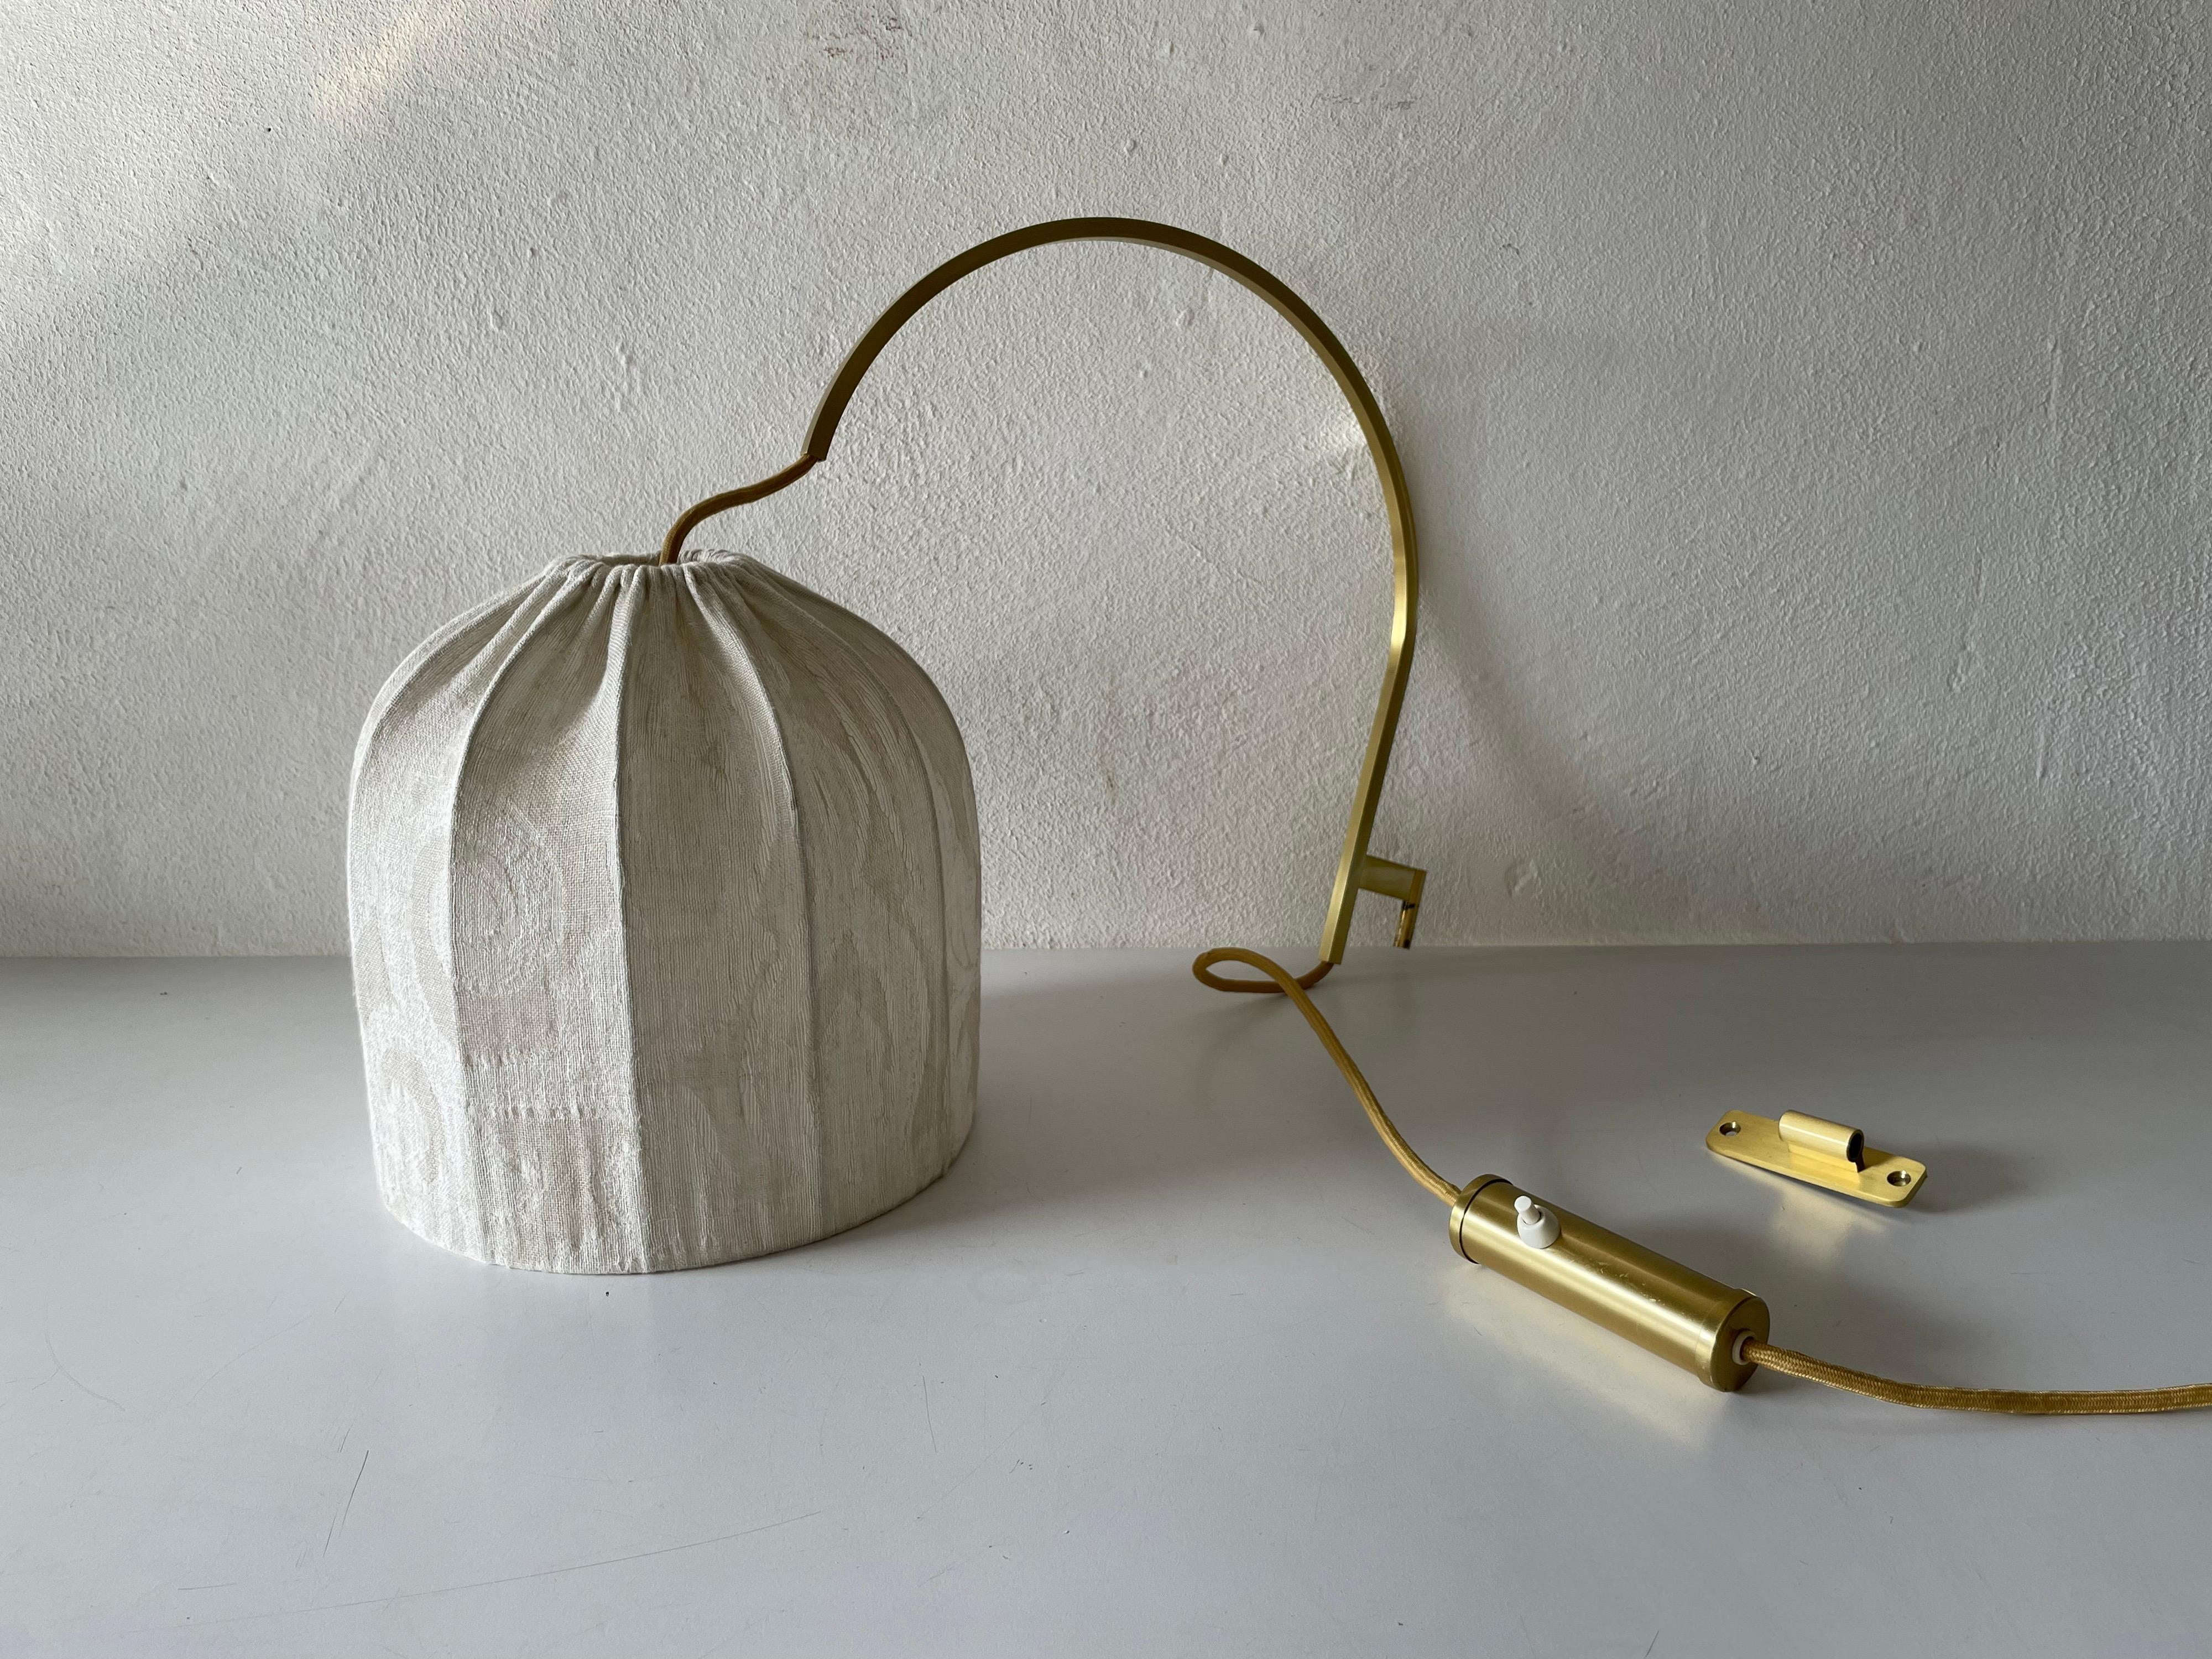 Very rare large Arch shaped brass body with fabric shade wall lamp by WKR Leuchten, 1970s Germany

Sculptural very elegant rare heavy wall lamp. 

It is very ideal and suitable for all living areas.

Lamp is in good condition. No damage, no